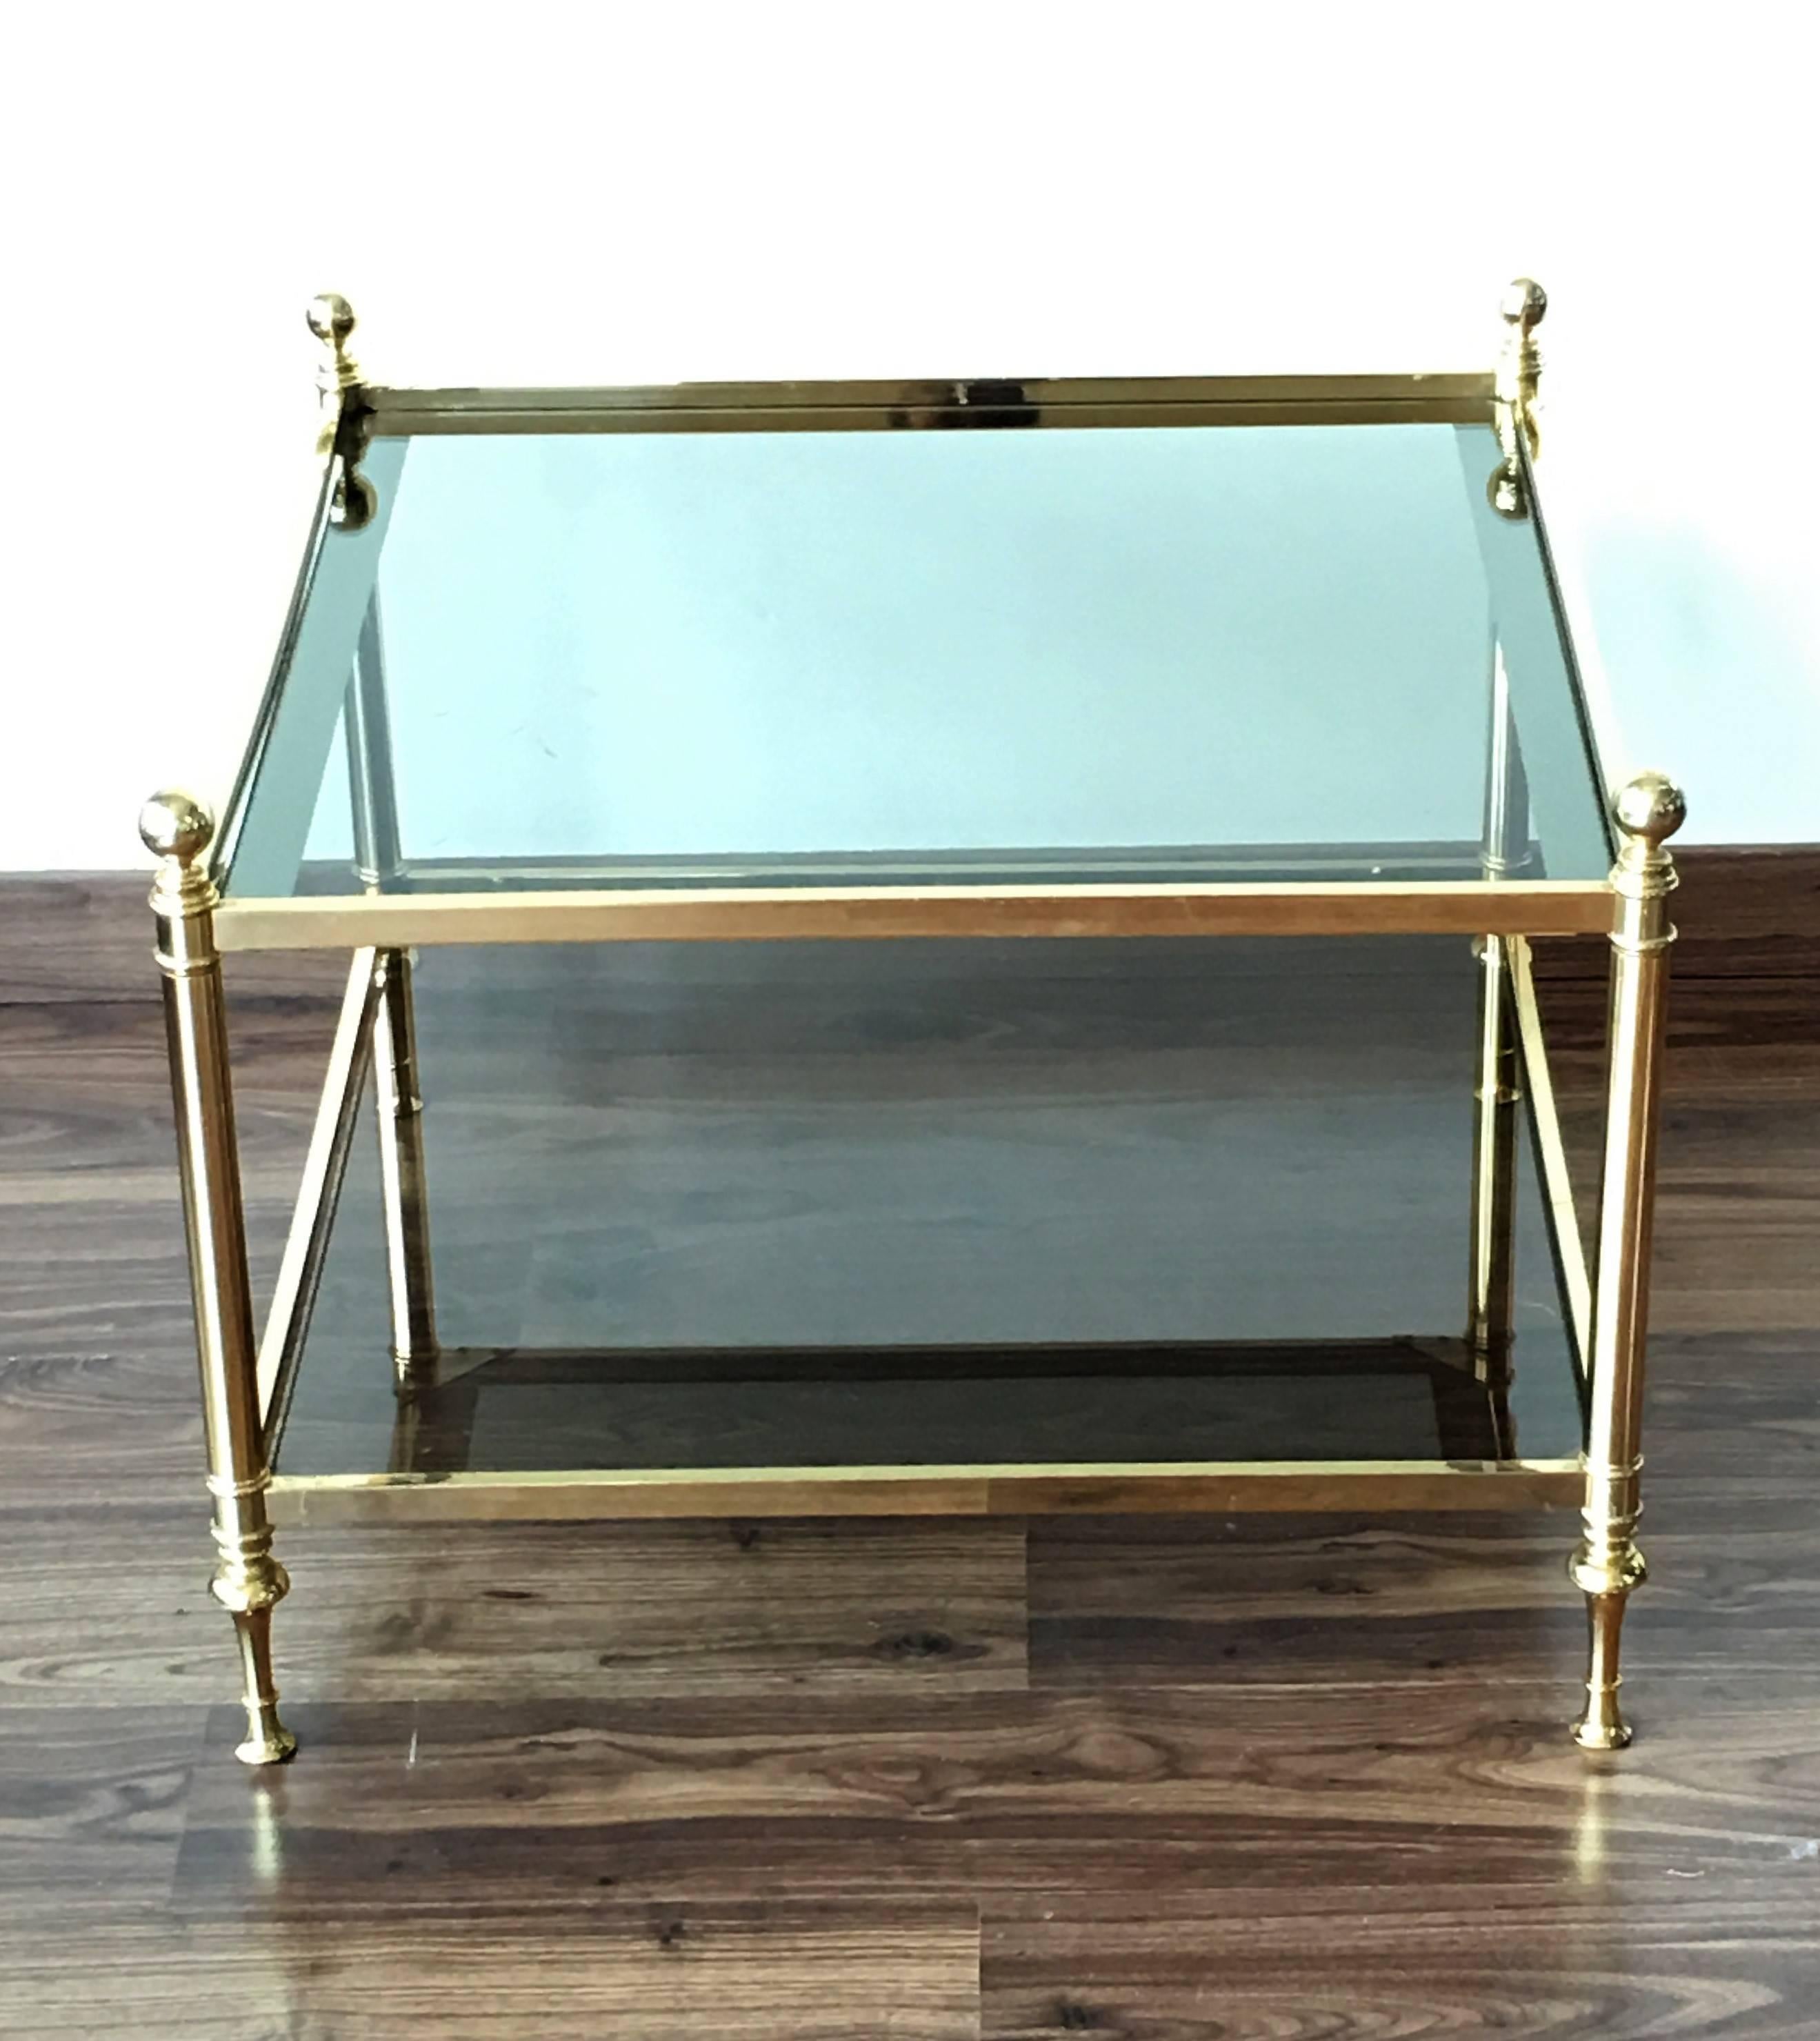 French vintage square coffee table in solid gilt brass with two glass shelves and ball finials. Iconic Maison Baguès piece with great proportions